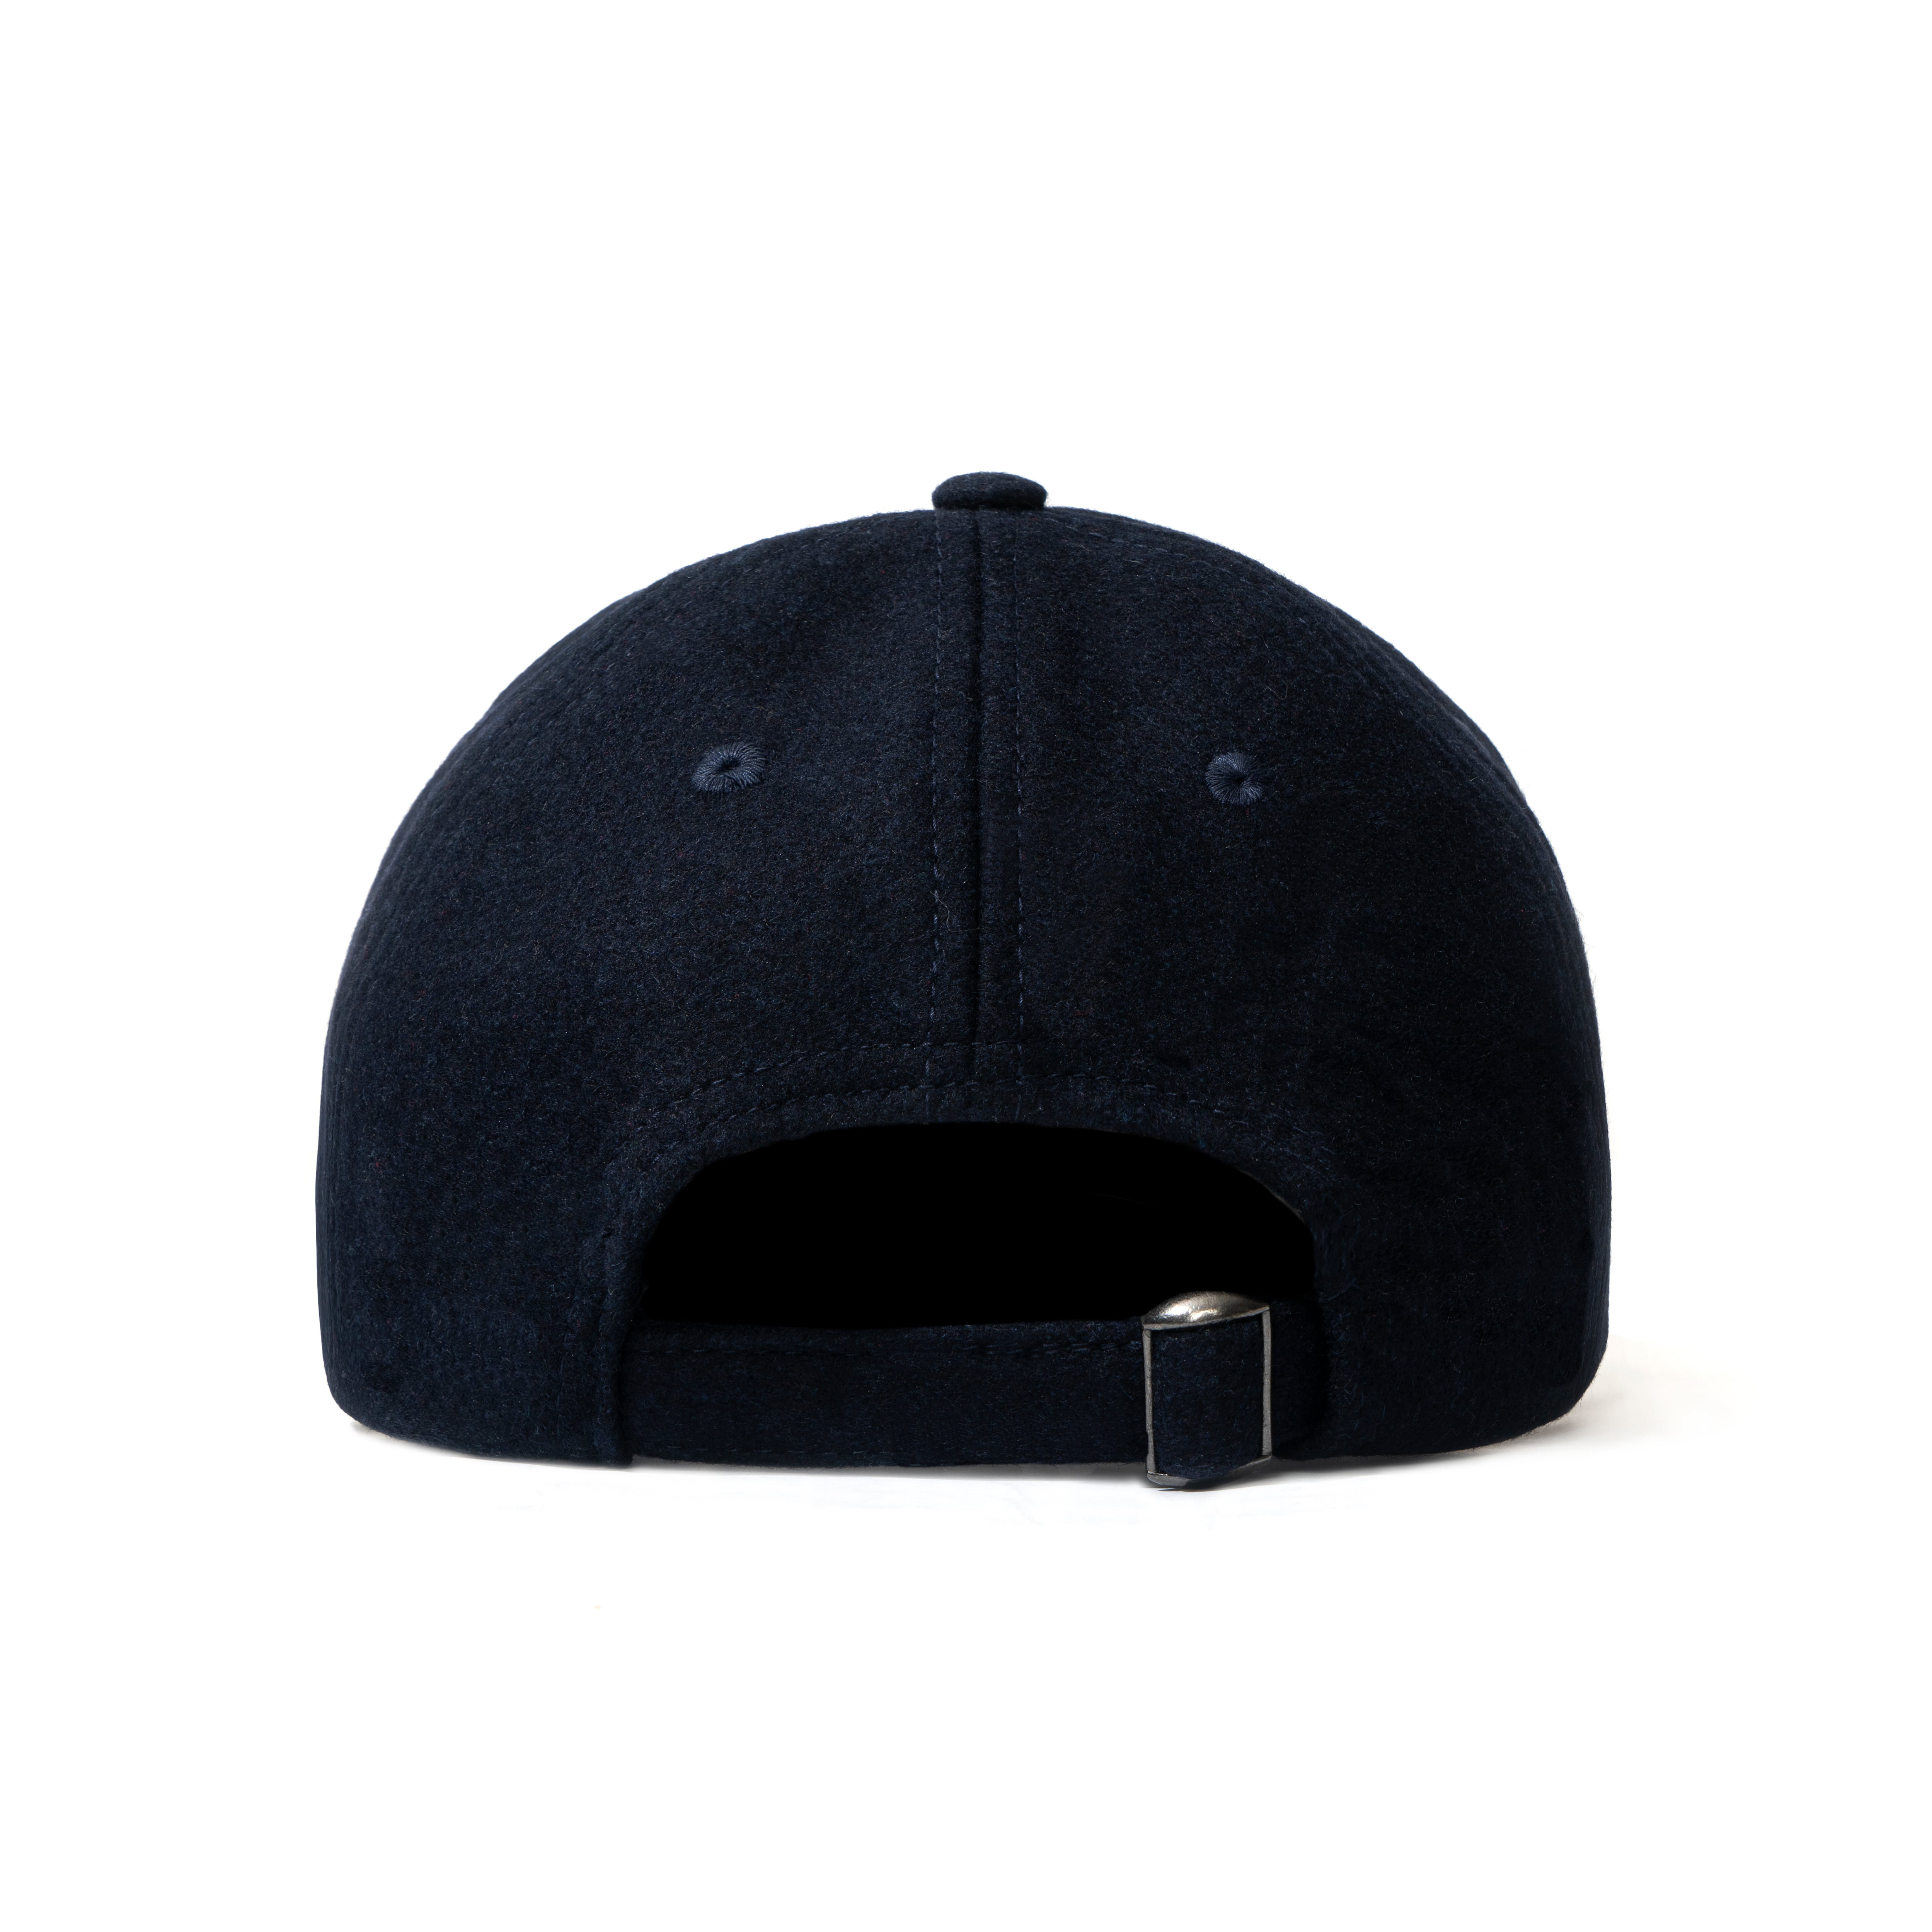 Wasted Youth x Afterbase Wool Cap Navy - SS22 - US